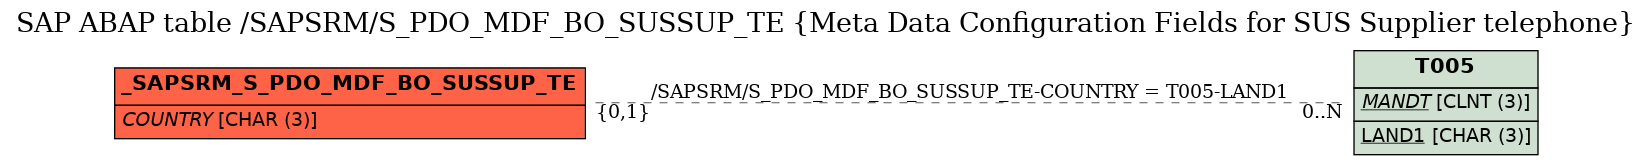 E-R Diagram for table /SAPSRM/S_PDO_MDF_BO_SUSSUP_TE (Meta Data Configuration Fields for SUS Supplier telephone)